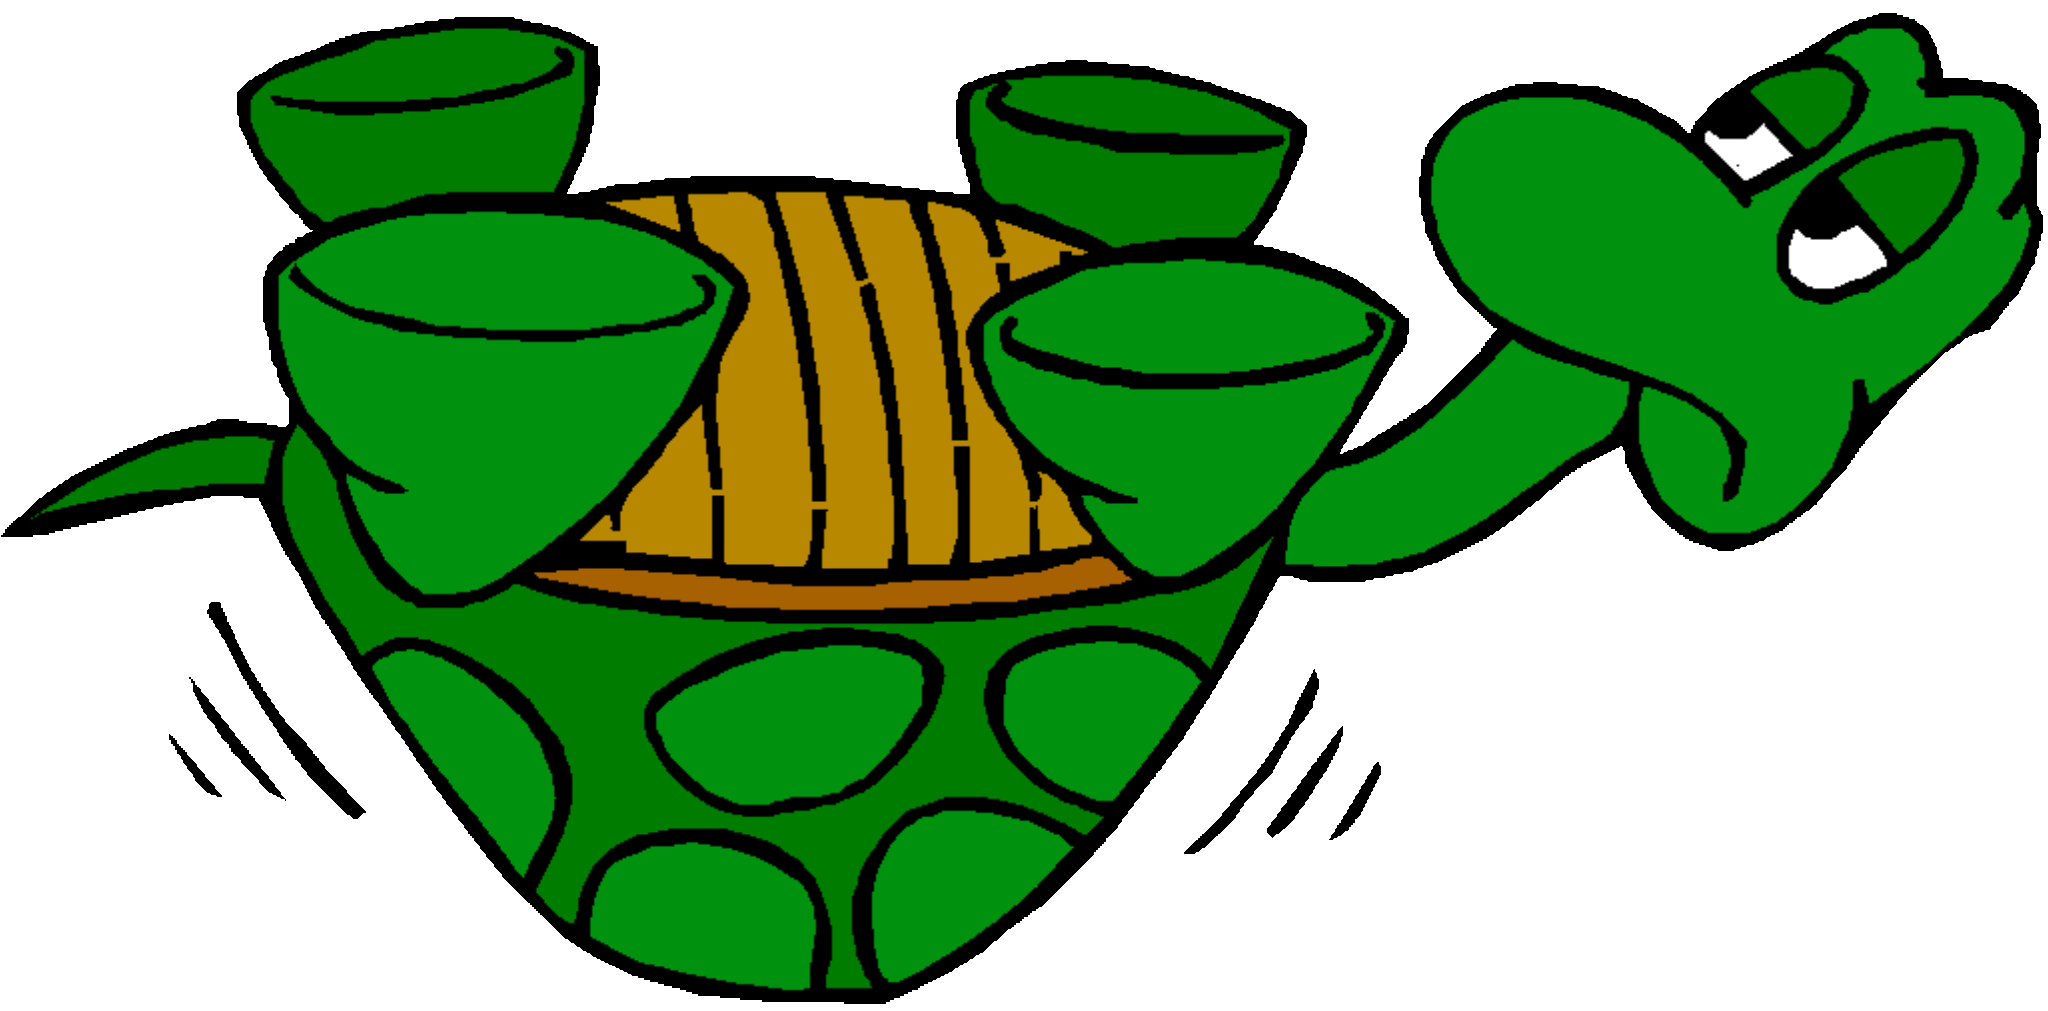 The Turtle Signifying Capsizing Is Of Course Upside Down